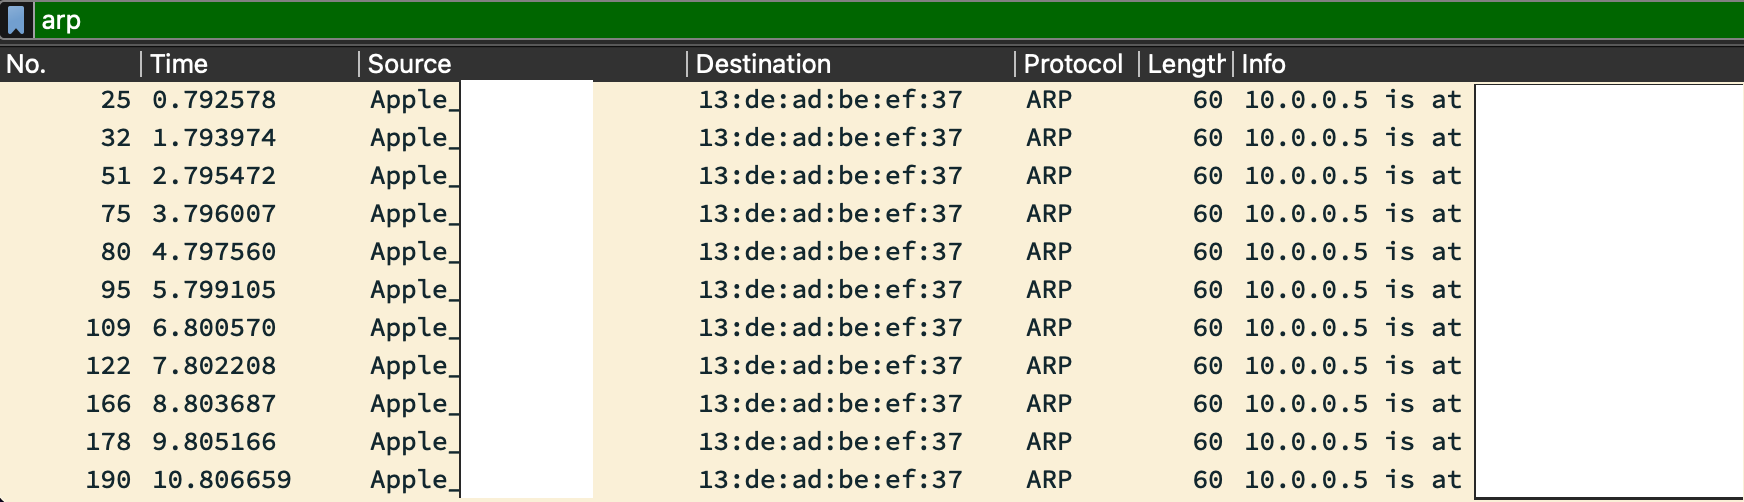 ARP Spoofing attack going on